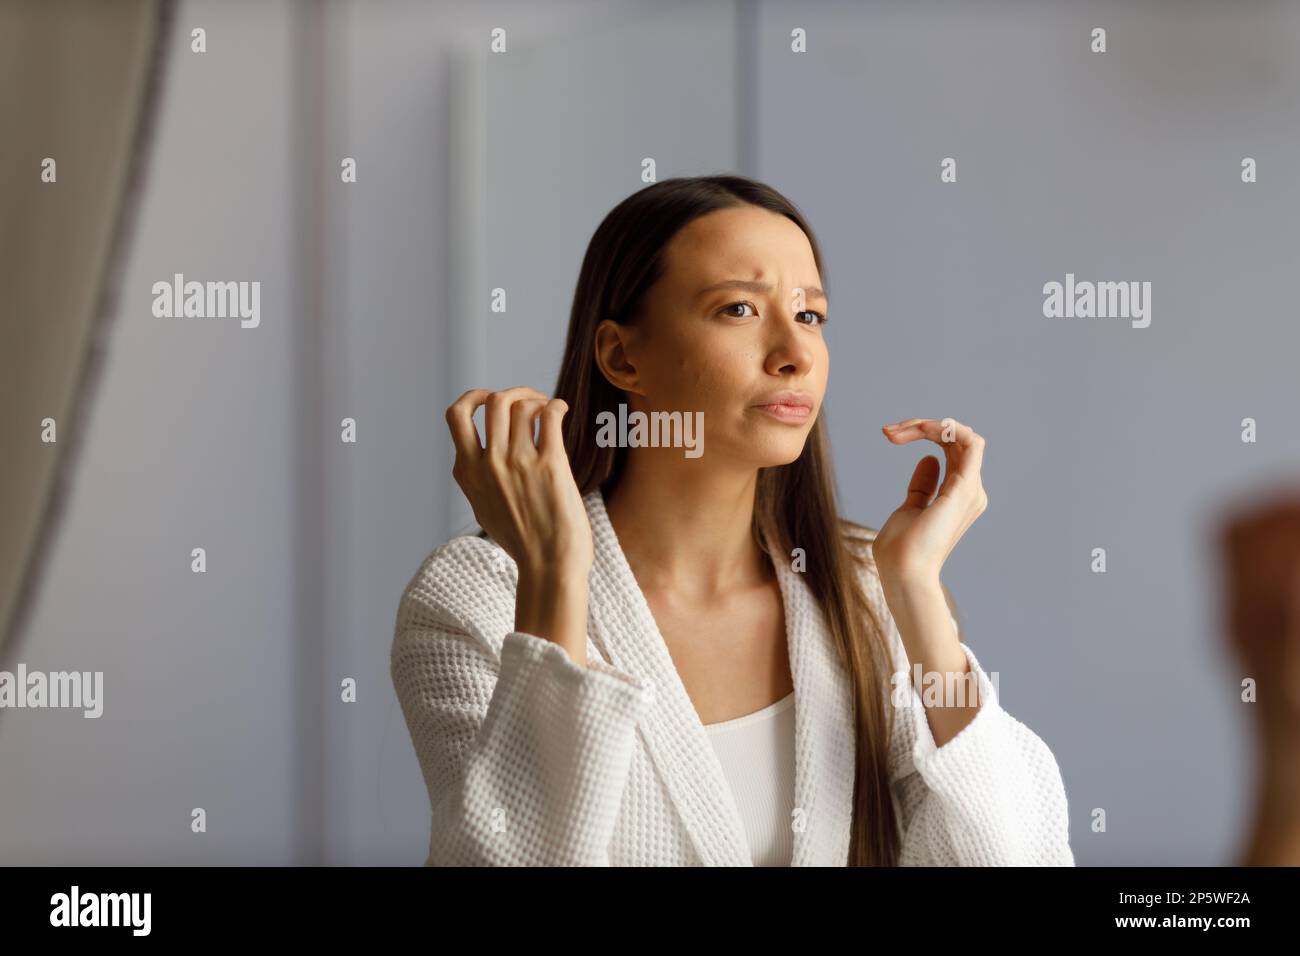 Attractive Upset Young Woman In White Bathrobe Examines Pimples On Her Face Problematic Skin On 7195